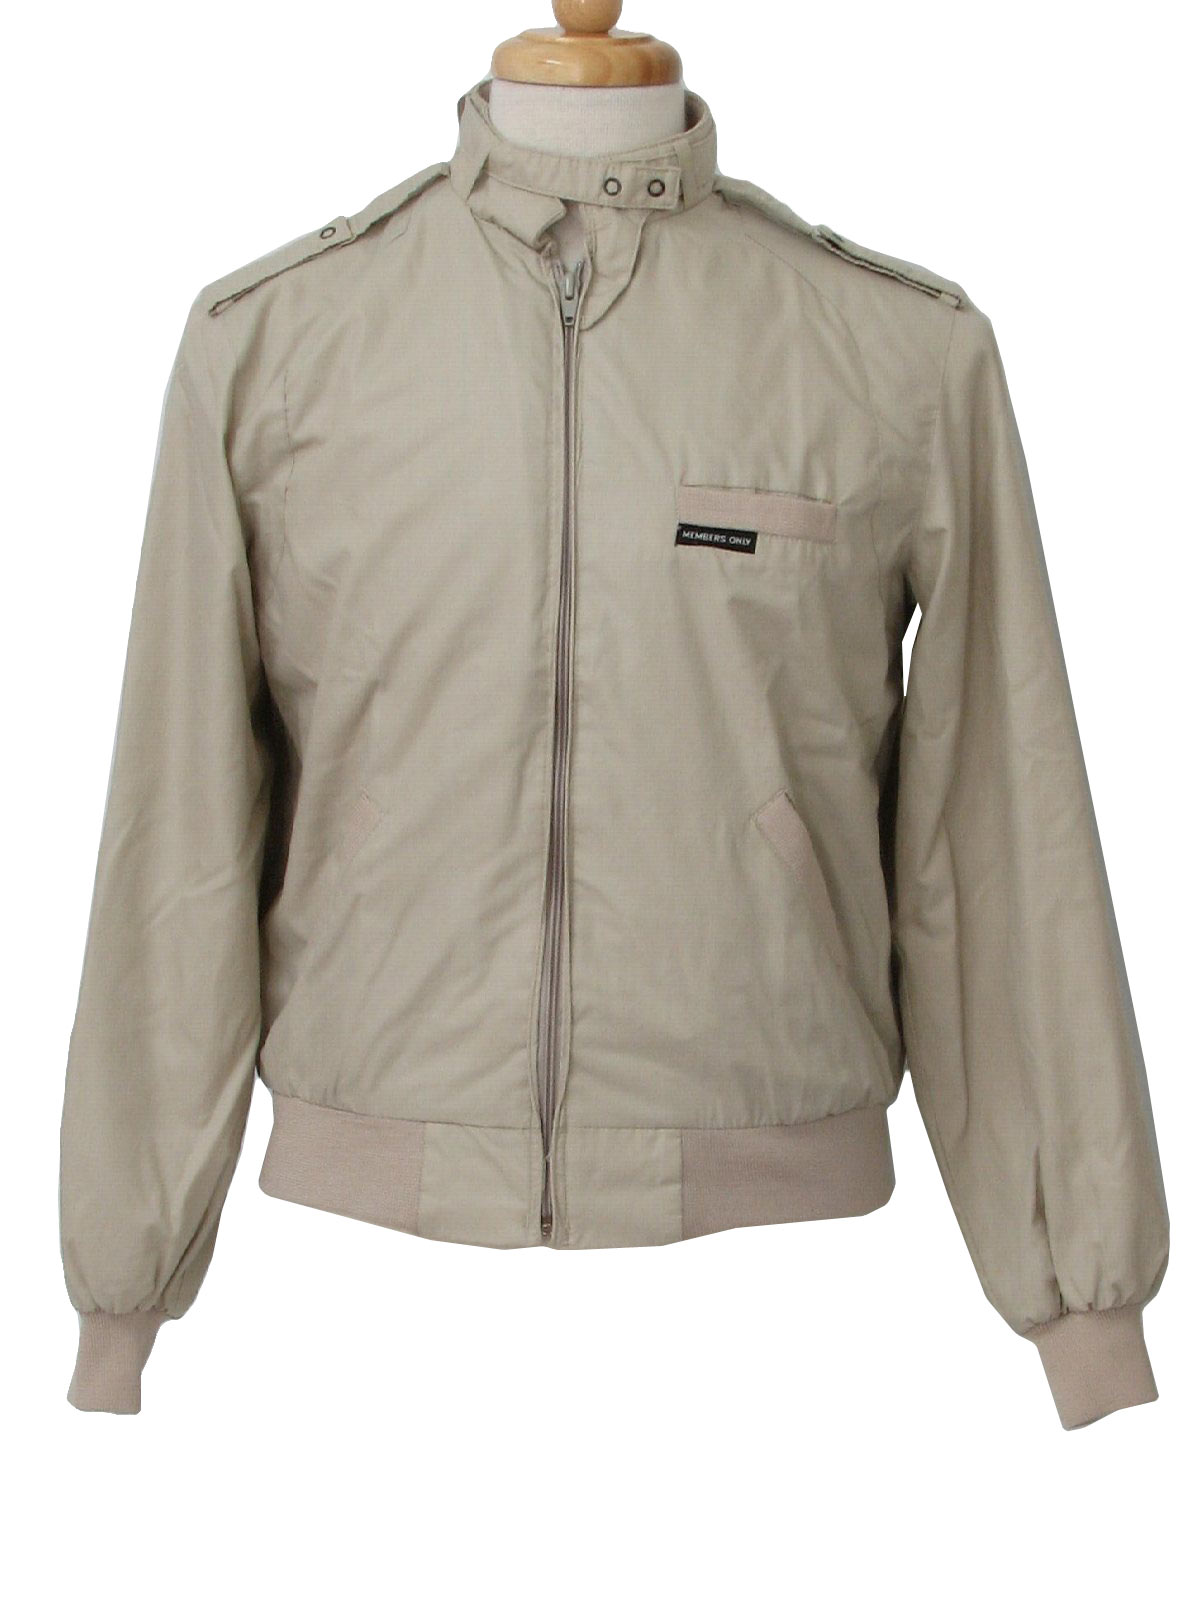 80s Retro Jacket: 80s -Members Only- Mens or boys light tan cotton and ...